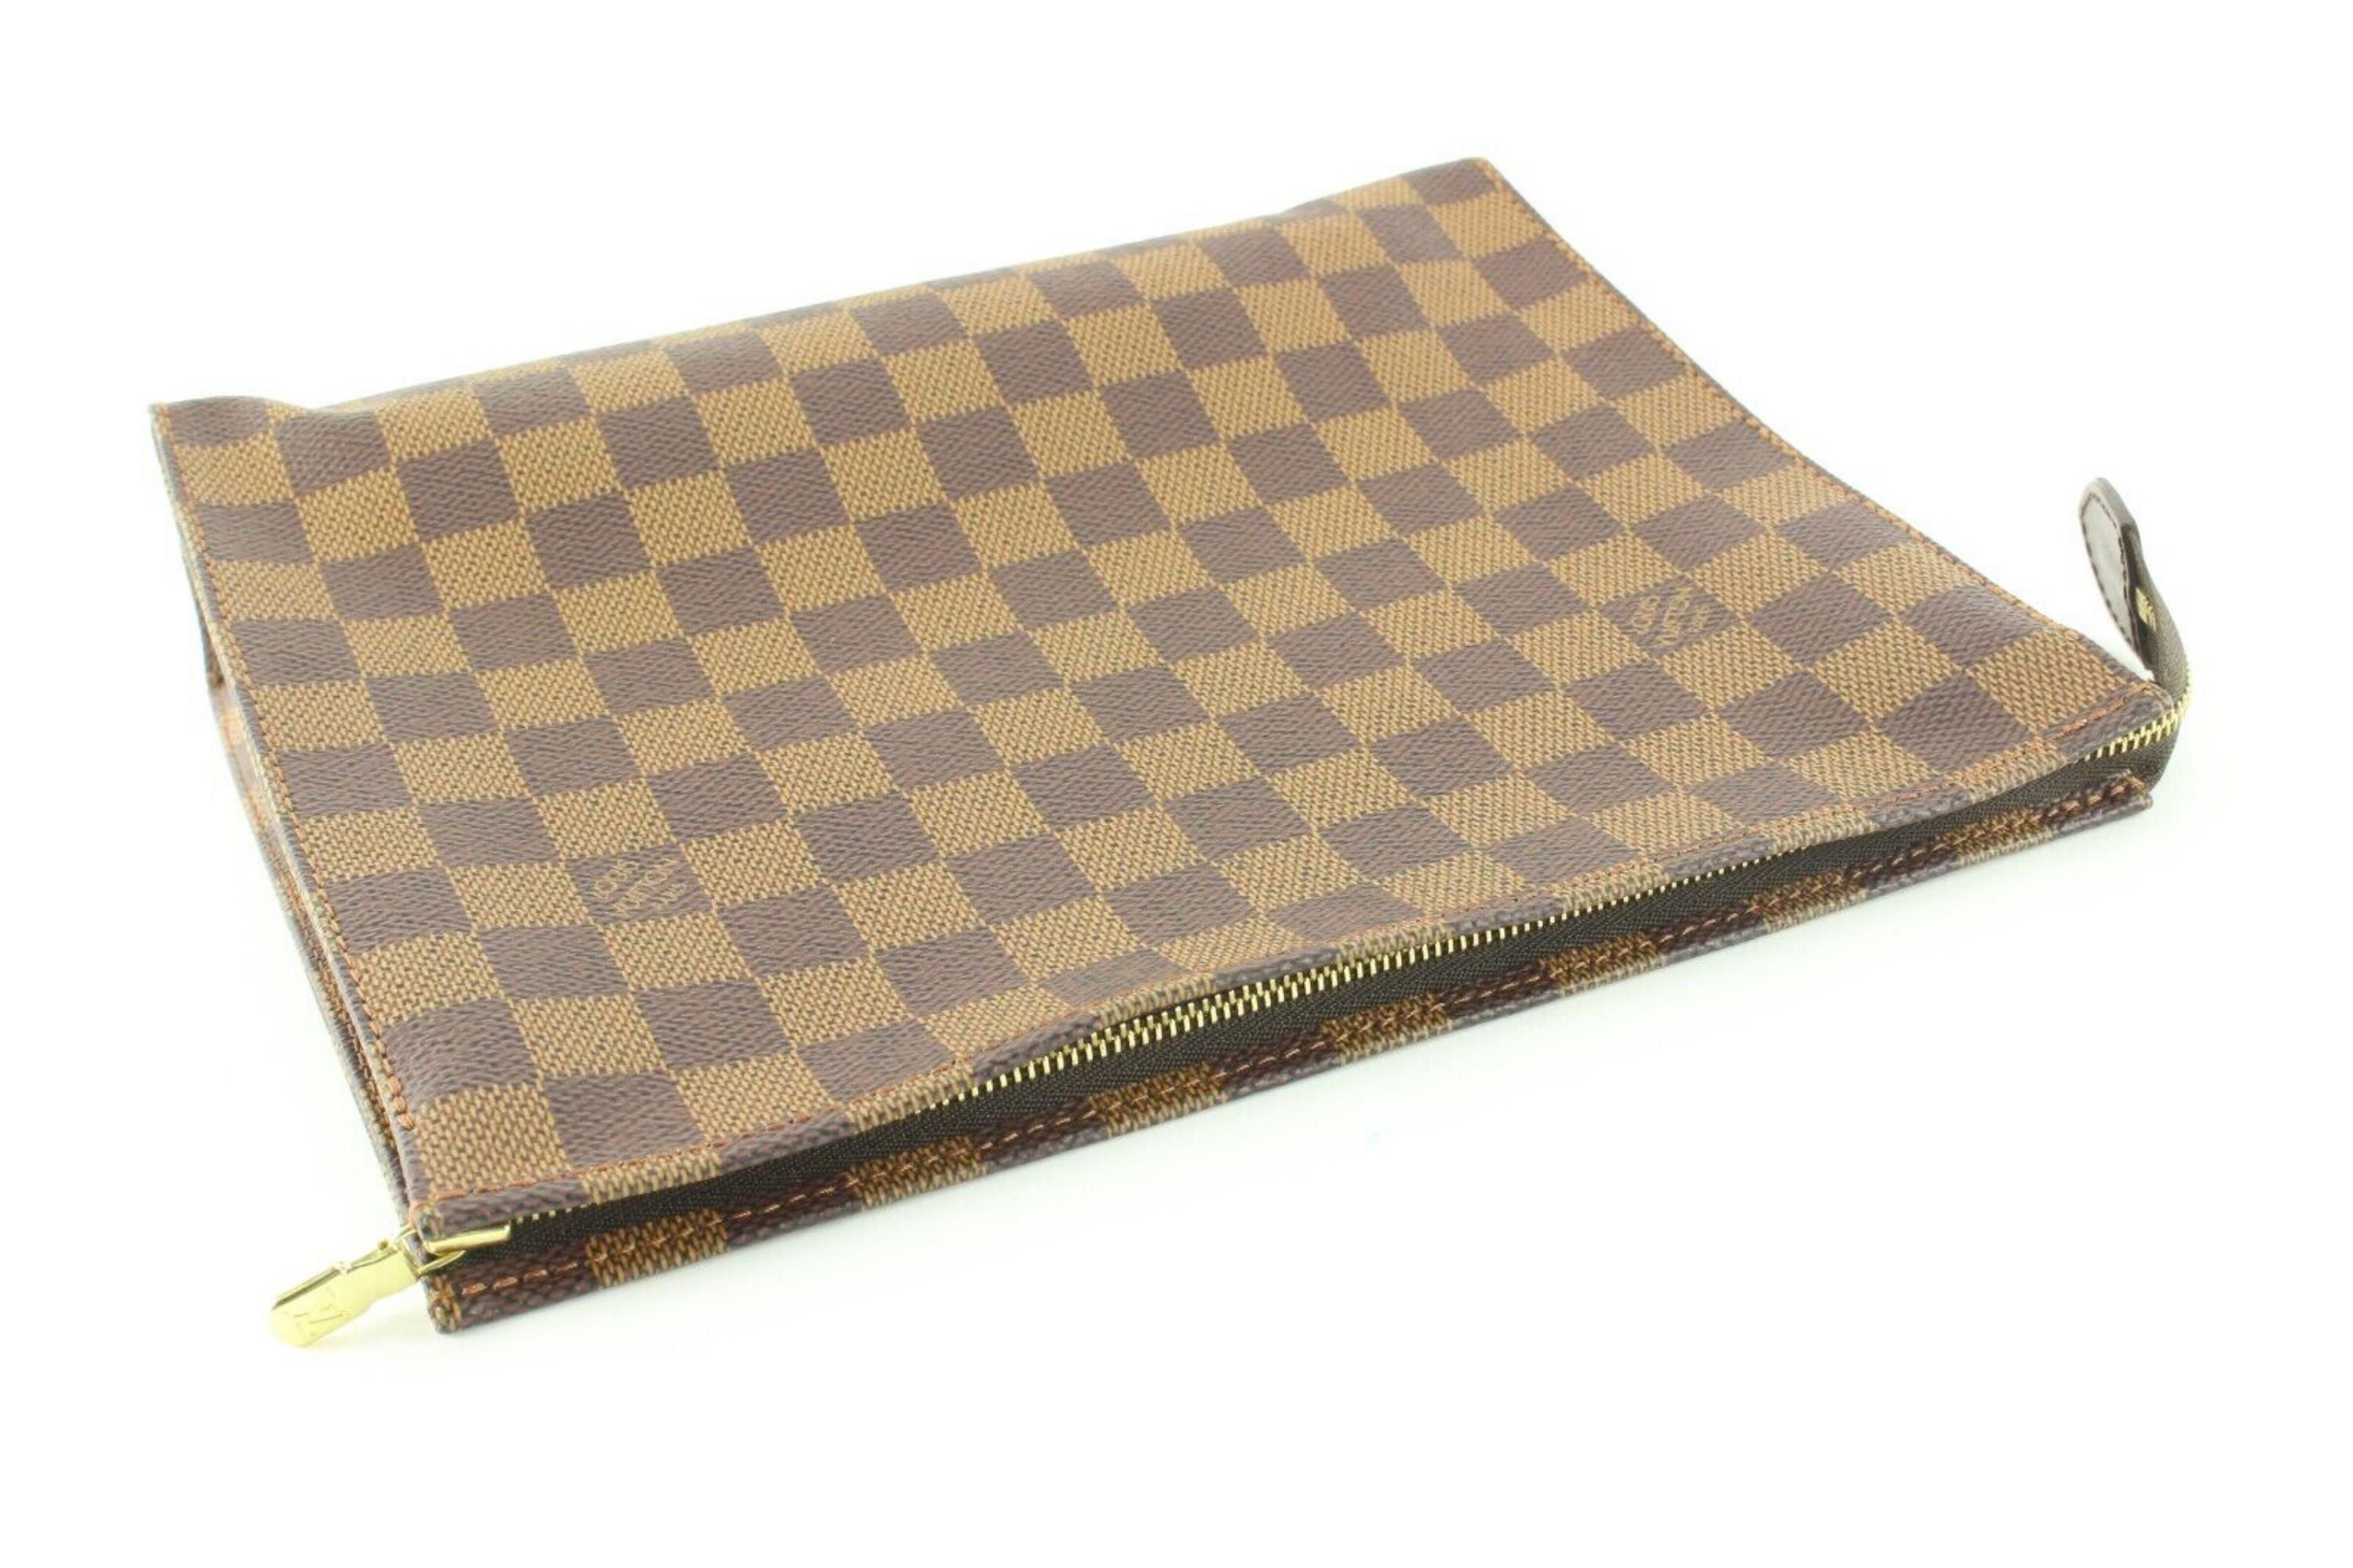 Louis Vuitton Ultra Rare Damier Ebene Toiletry 26 Cosmetic Pouch 2LK0427 In Excellent Condition For Sale In Dix hills, NY